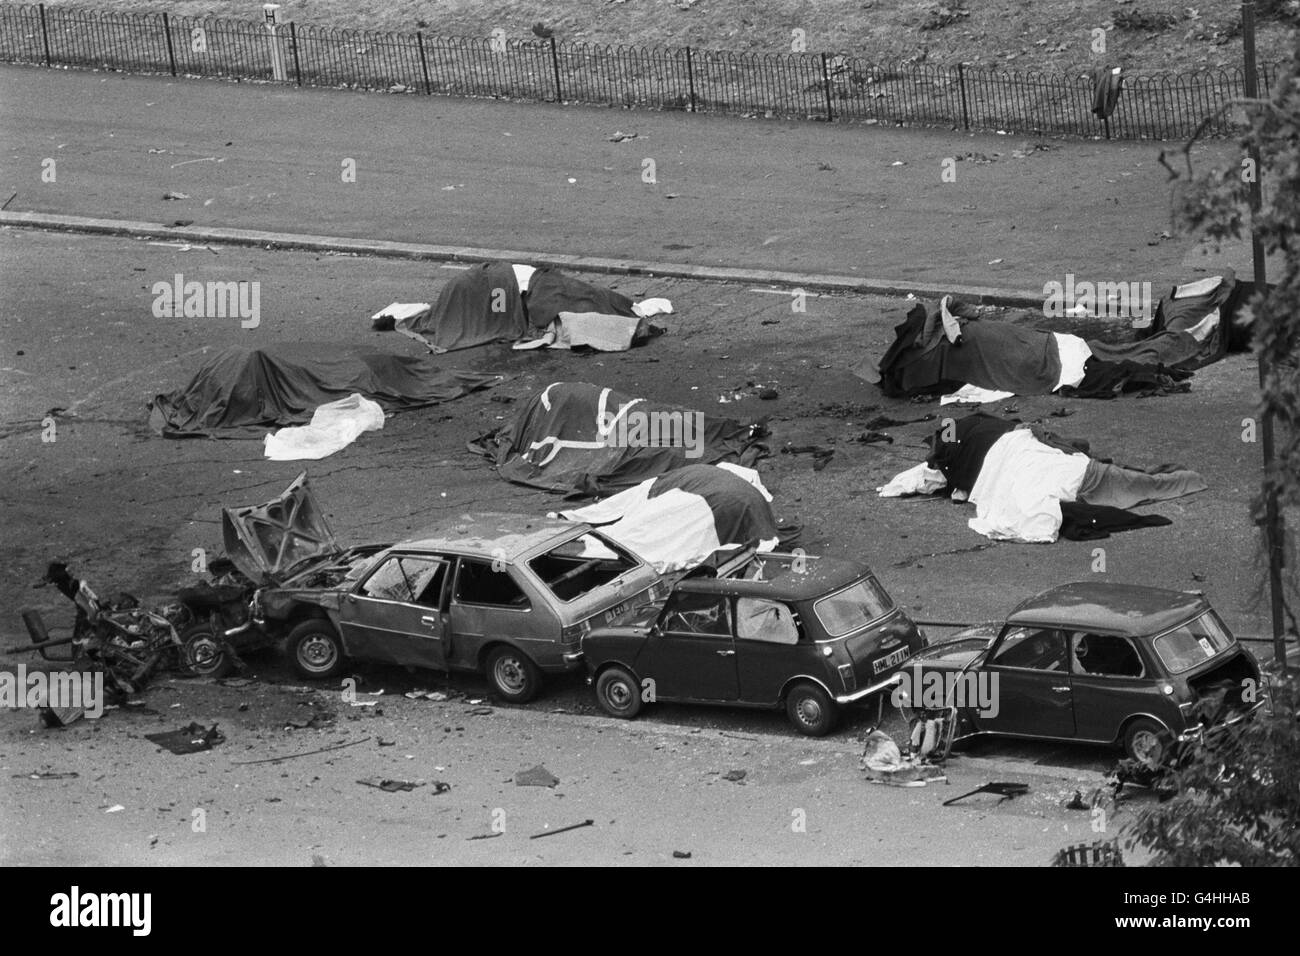 20TH JULY : On this day in 1982 two IRA bombs killed eight soldiers and seven horses on ceremonial duty in Hyde PArk and Regents Park. Dead horses covered up and wrecked cars at the scene of carnage in Rotten Row, Hyde Park, after an IRA bomb exploded as the Household Cavalry was passing. The bomb, the first of two in London on the same day, killed four soldiers and seven of their horses. * 06/12/01Echo, the retired police horse injured during the bombing celebrating his 30th birthday. The grey Gelding, suffered extensive superficial injuries during attack, when waiting terrorists detonated a Stock Photo